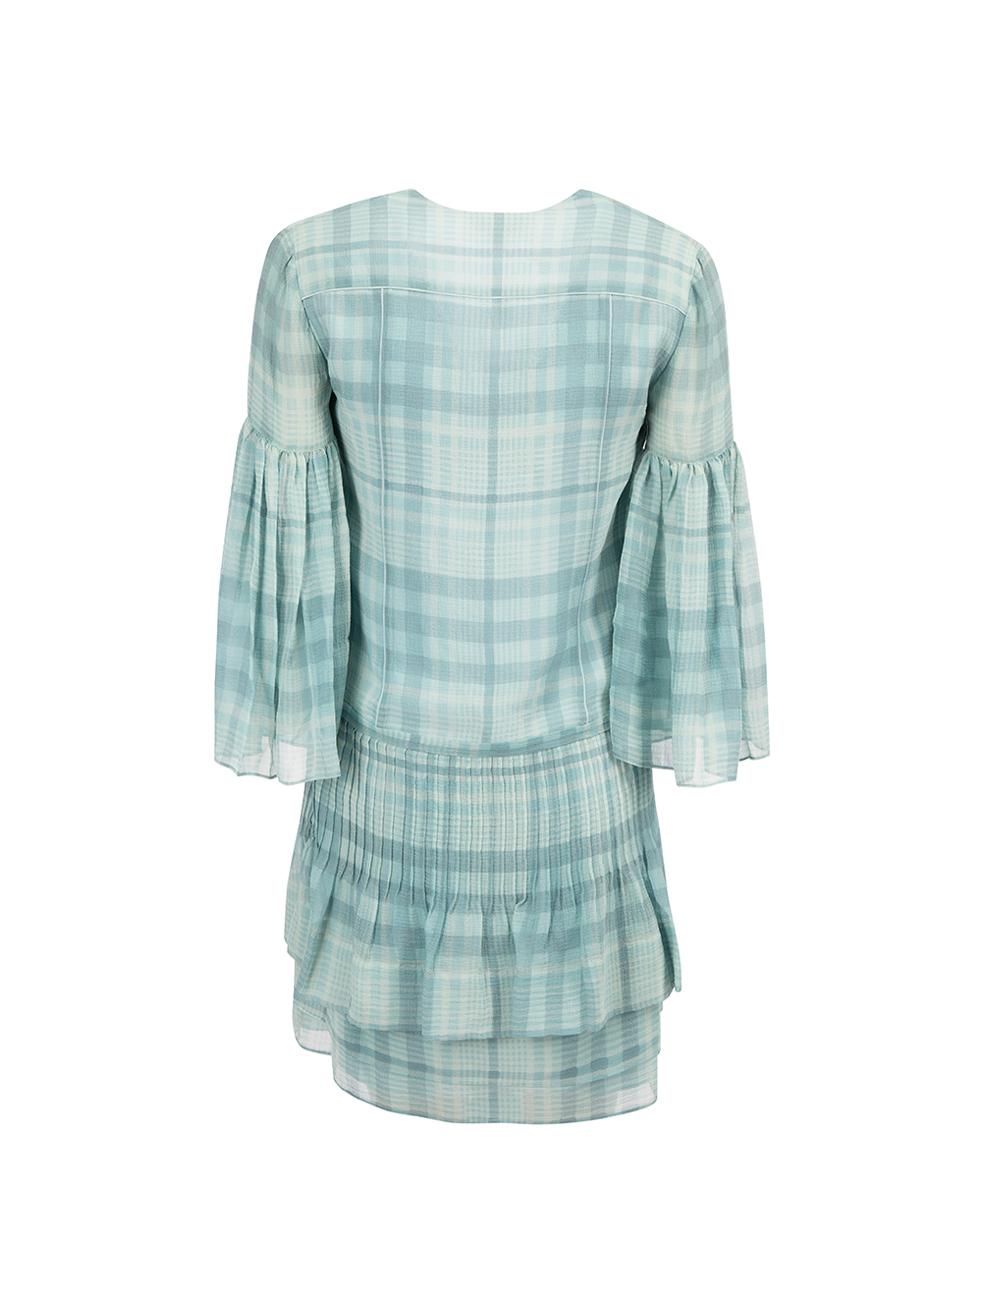 Pre-Loved Burberry Women's Blue Check V-Neck Mini Dress In Excellent Condition For Sale In London, GB